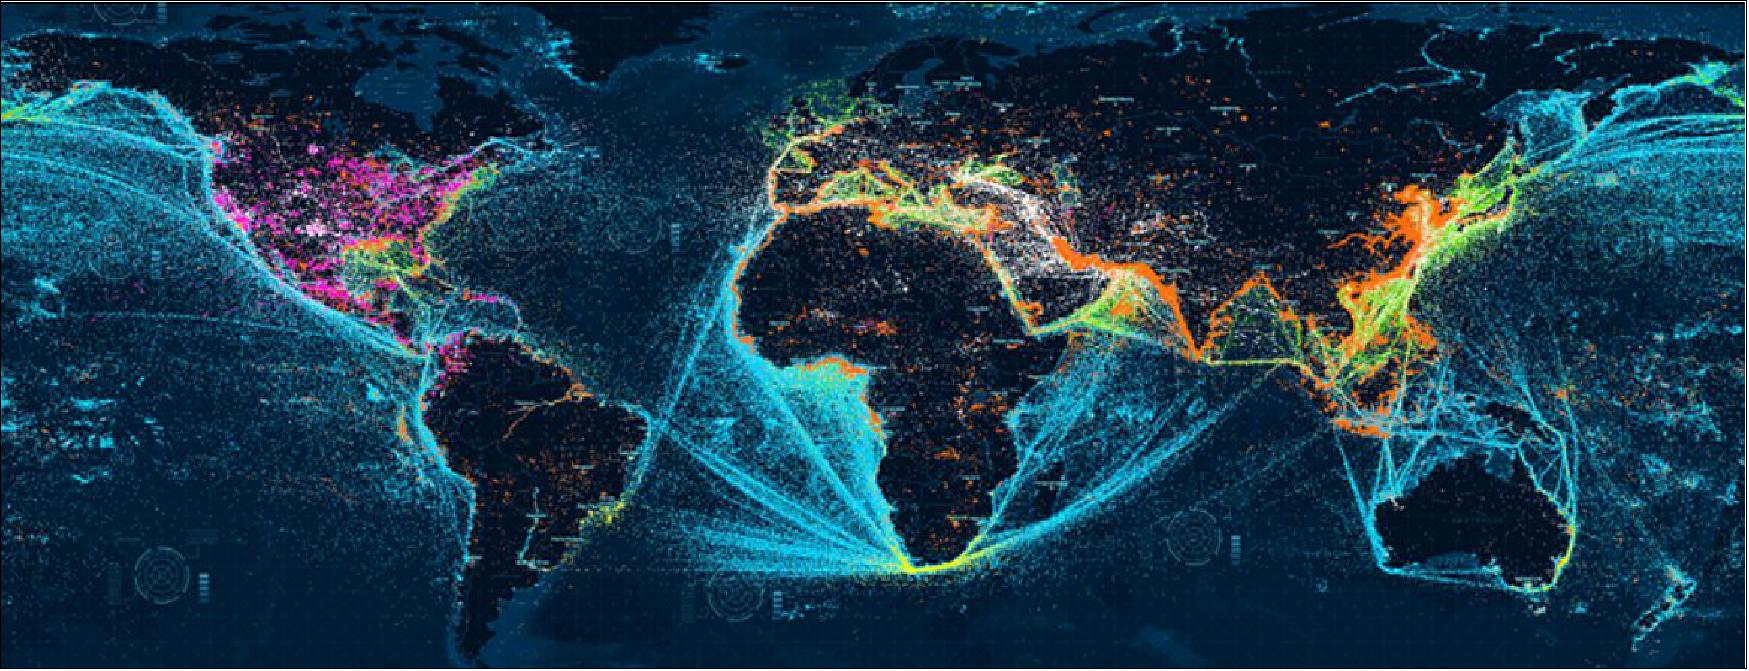 Figure 19: Pilot program explores how commercial RF geospatial data can augment NGA and United States combatant command intelligence activities (image credit: HawkEye 360)